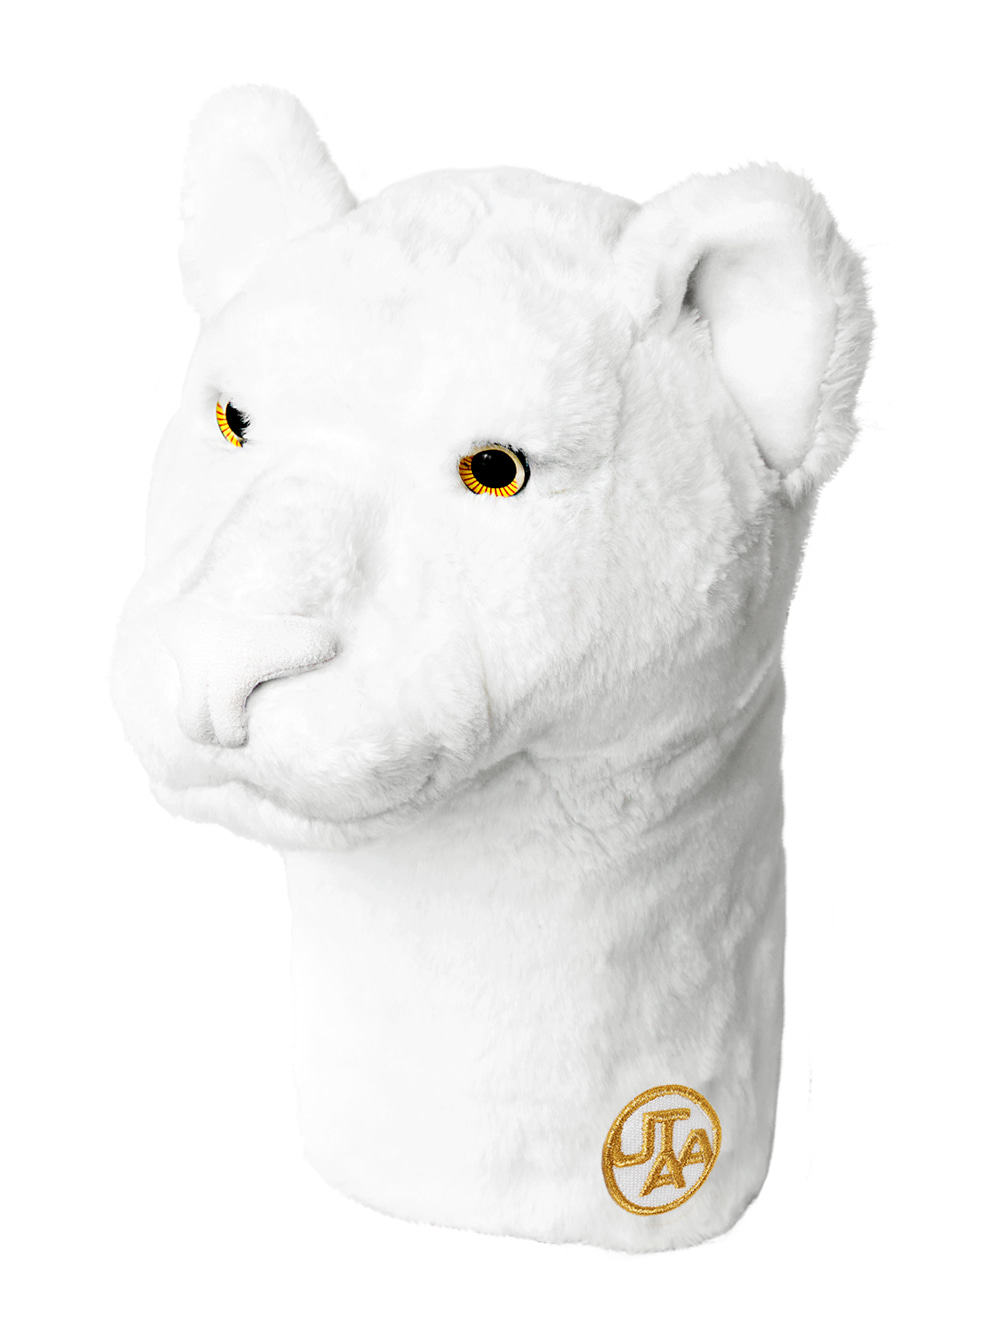 UTAA Panther Golf Driver Headcover : White (UC0GXU410WH)